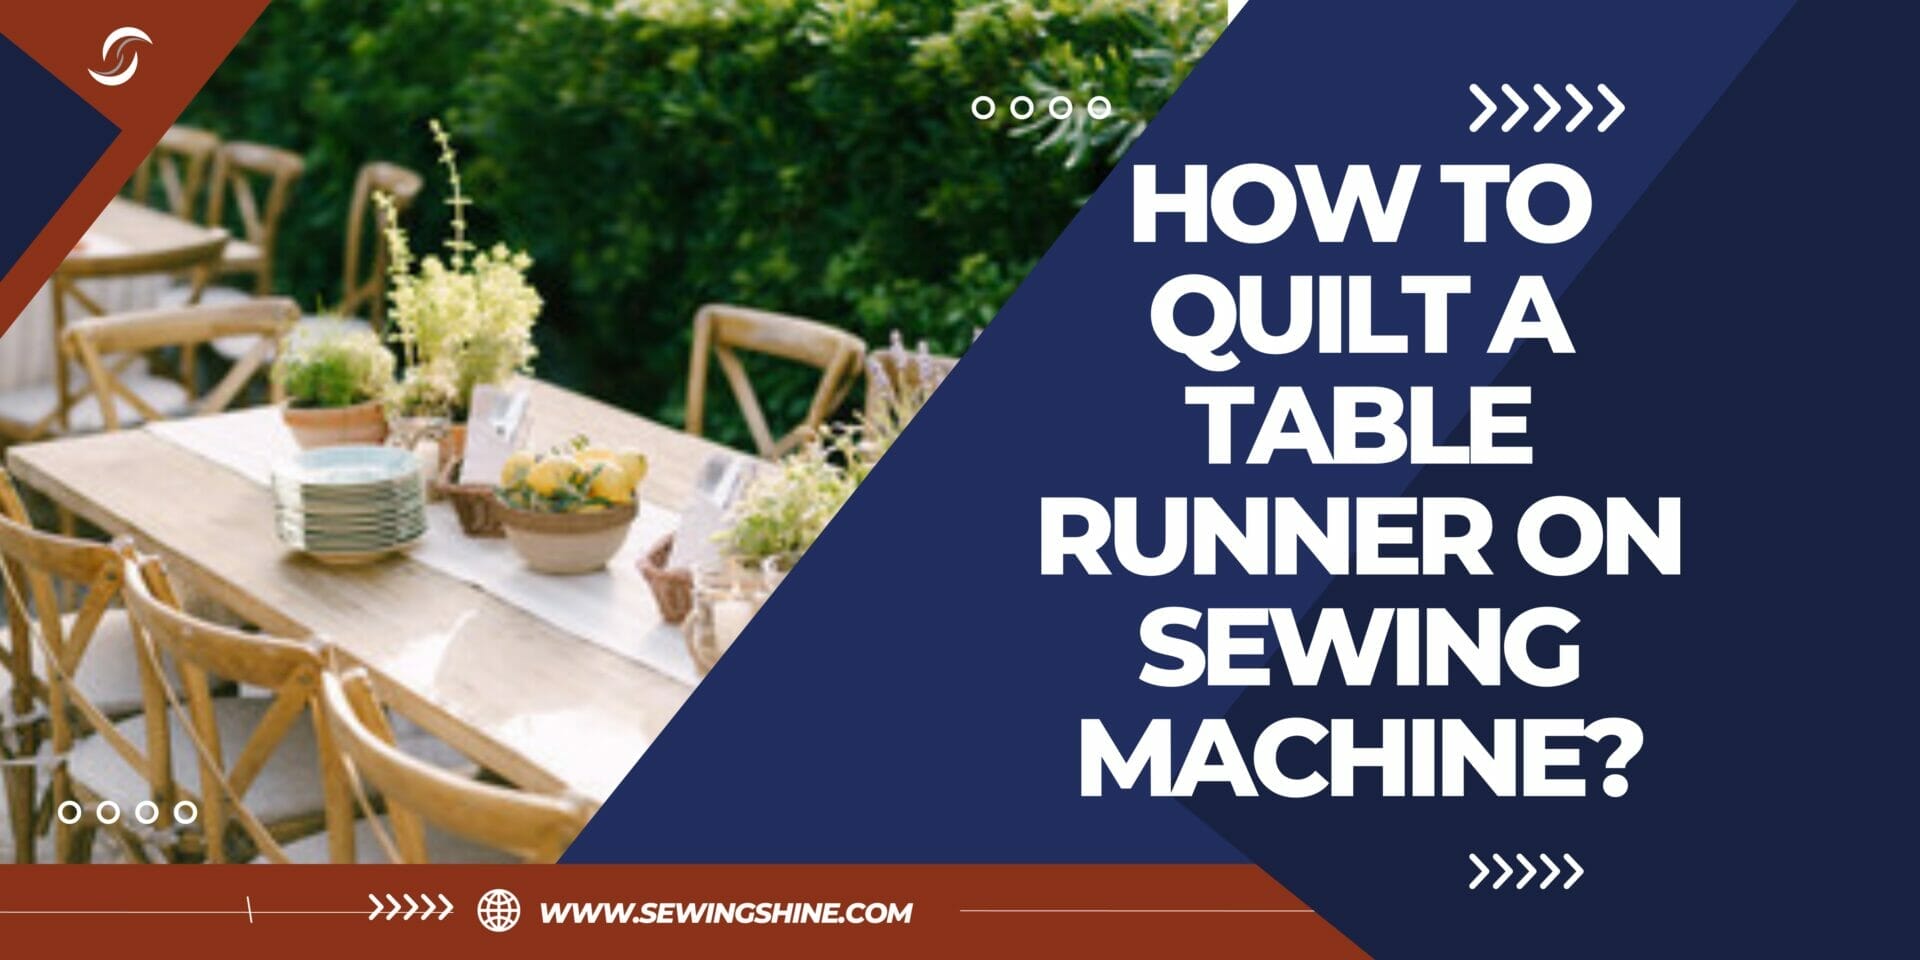 How To Quilt A Table Runner On Sewing Machine